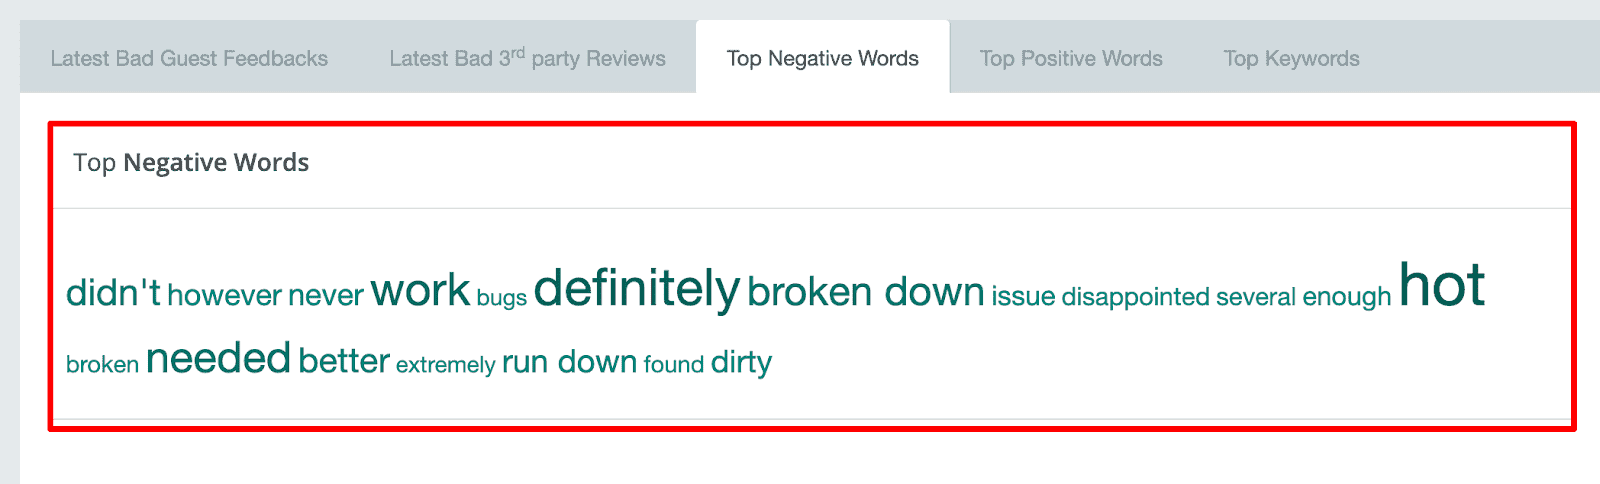 negative review keywords from vacation rental client